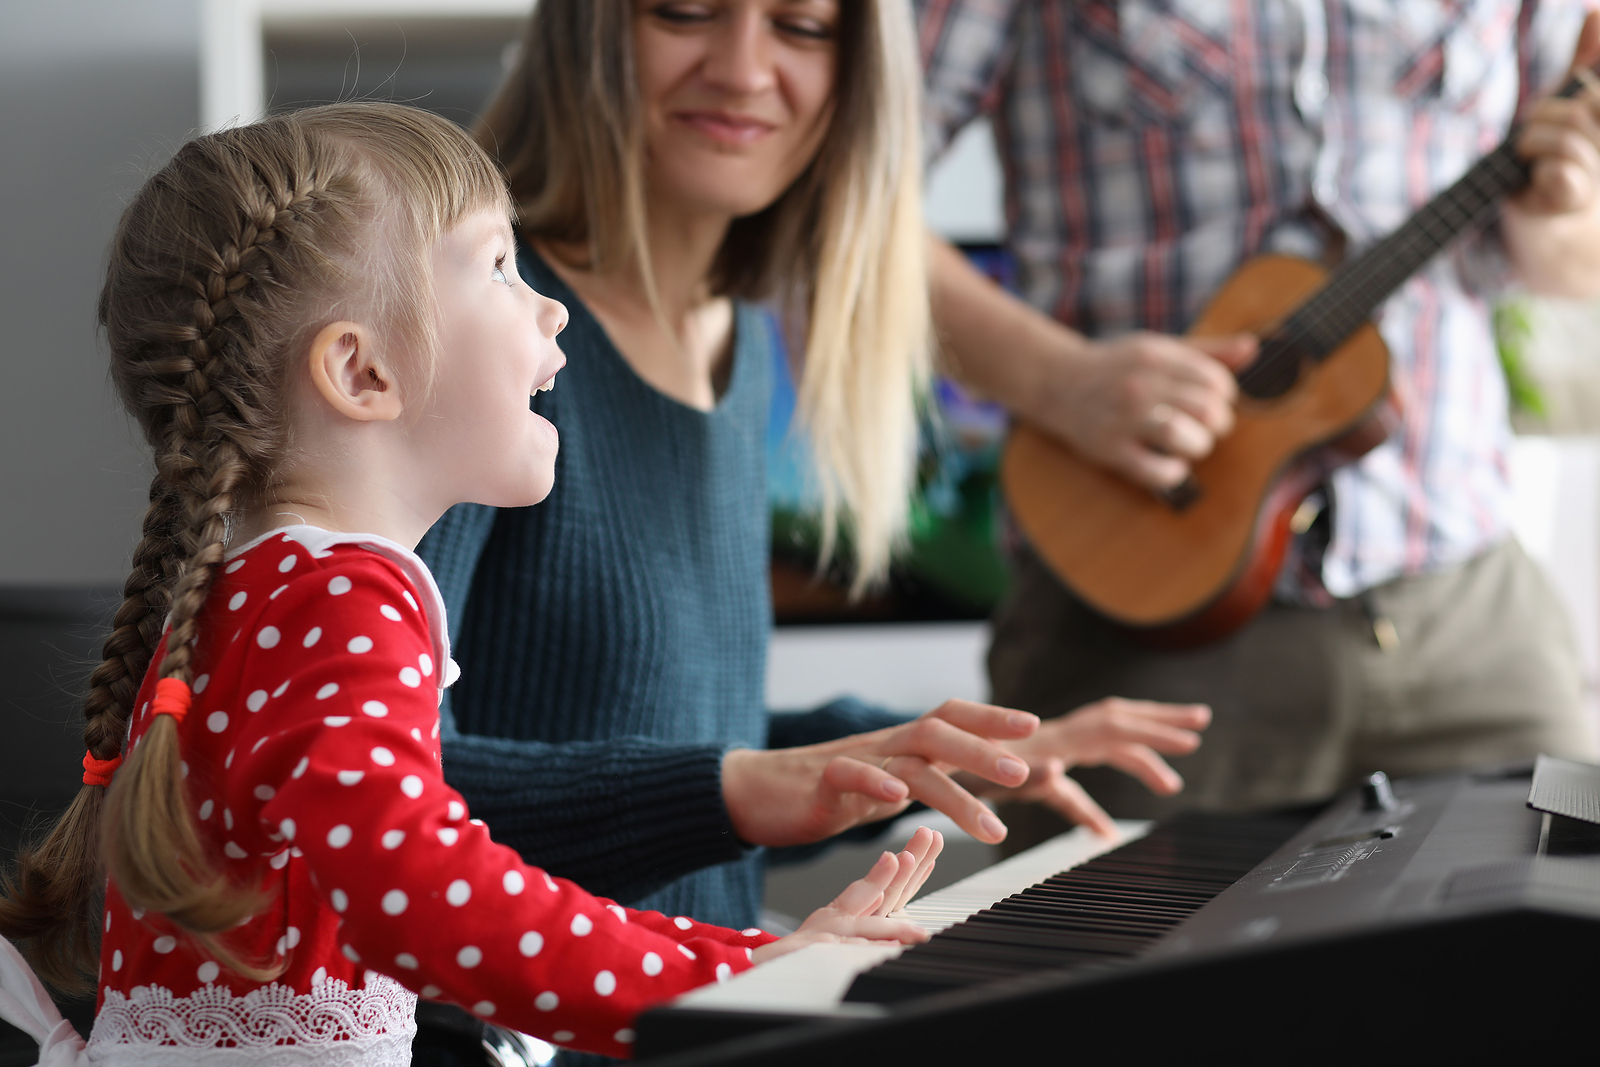 Little beautiful girl sings song is played on piano together with her parents portrait. Classes at music school for children concept.